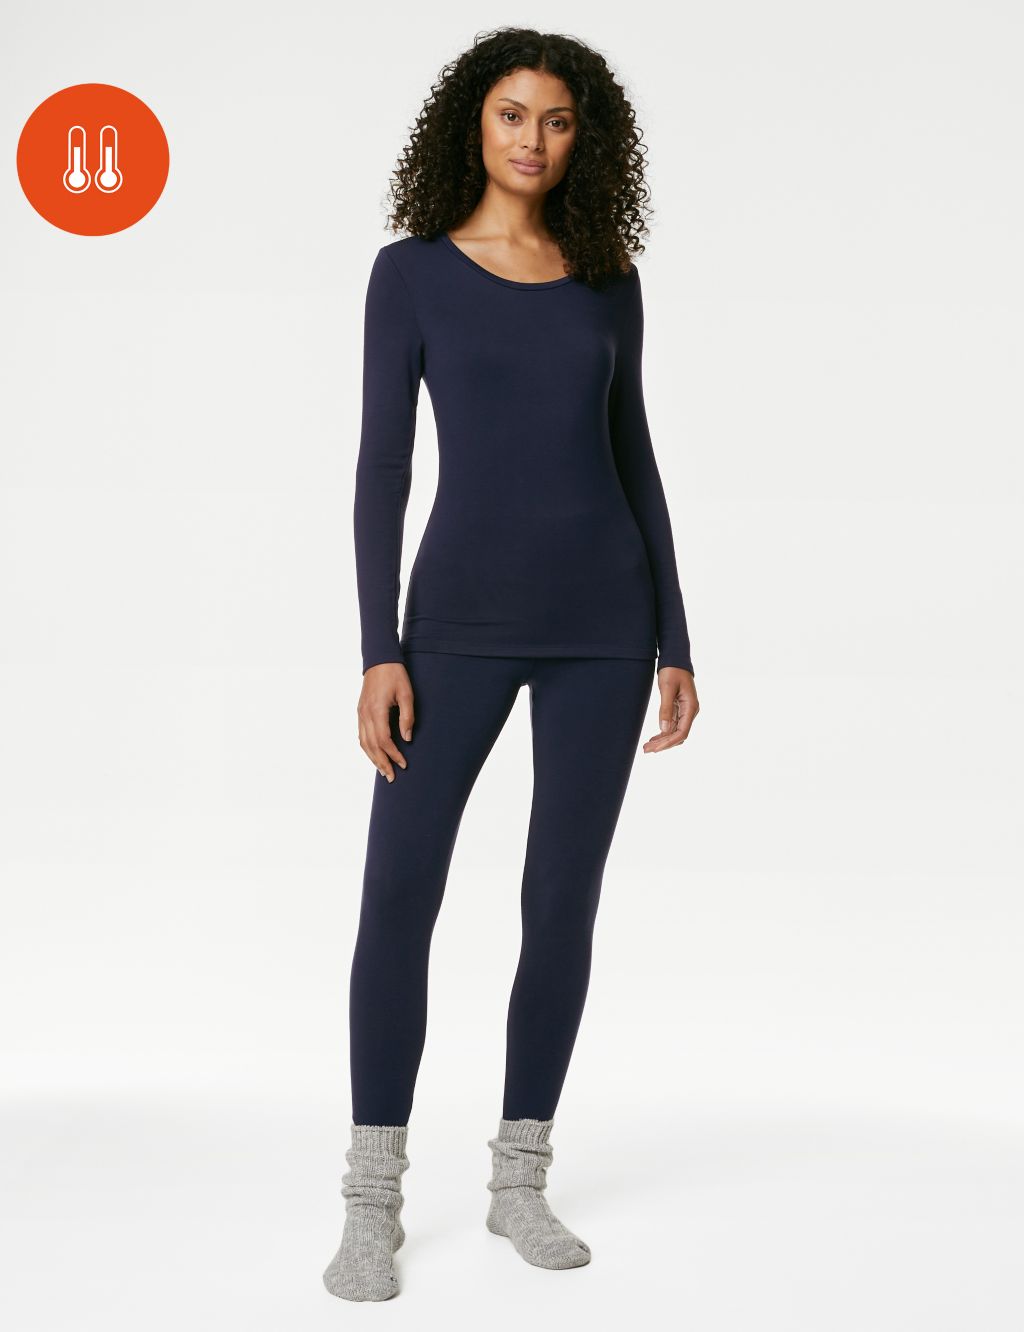 M&S shoppers praise £16 thermal leggings that are 'perfect' for winter and  'go with everything' - Daily Record